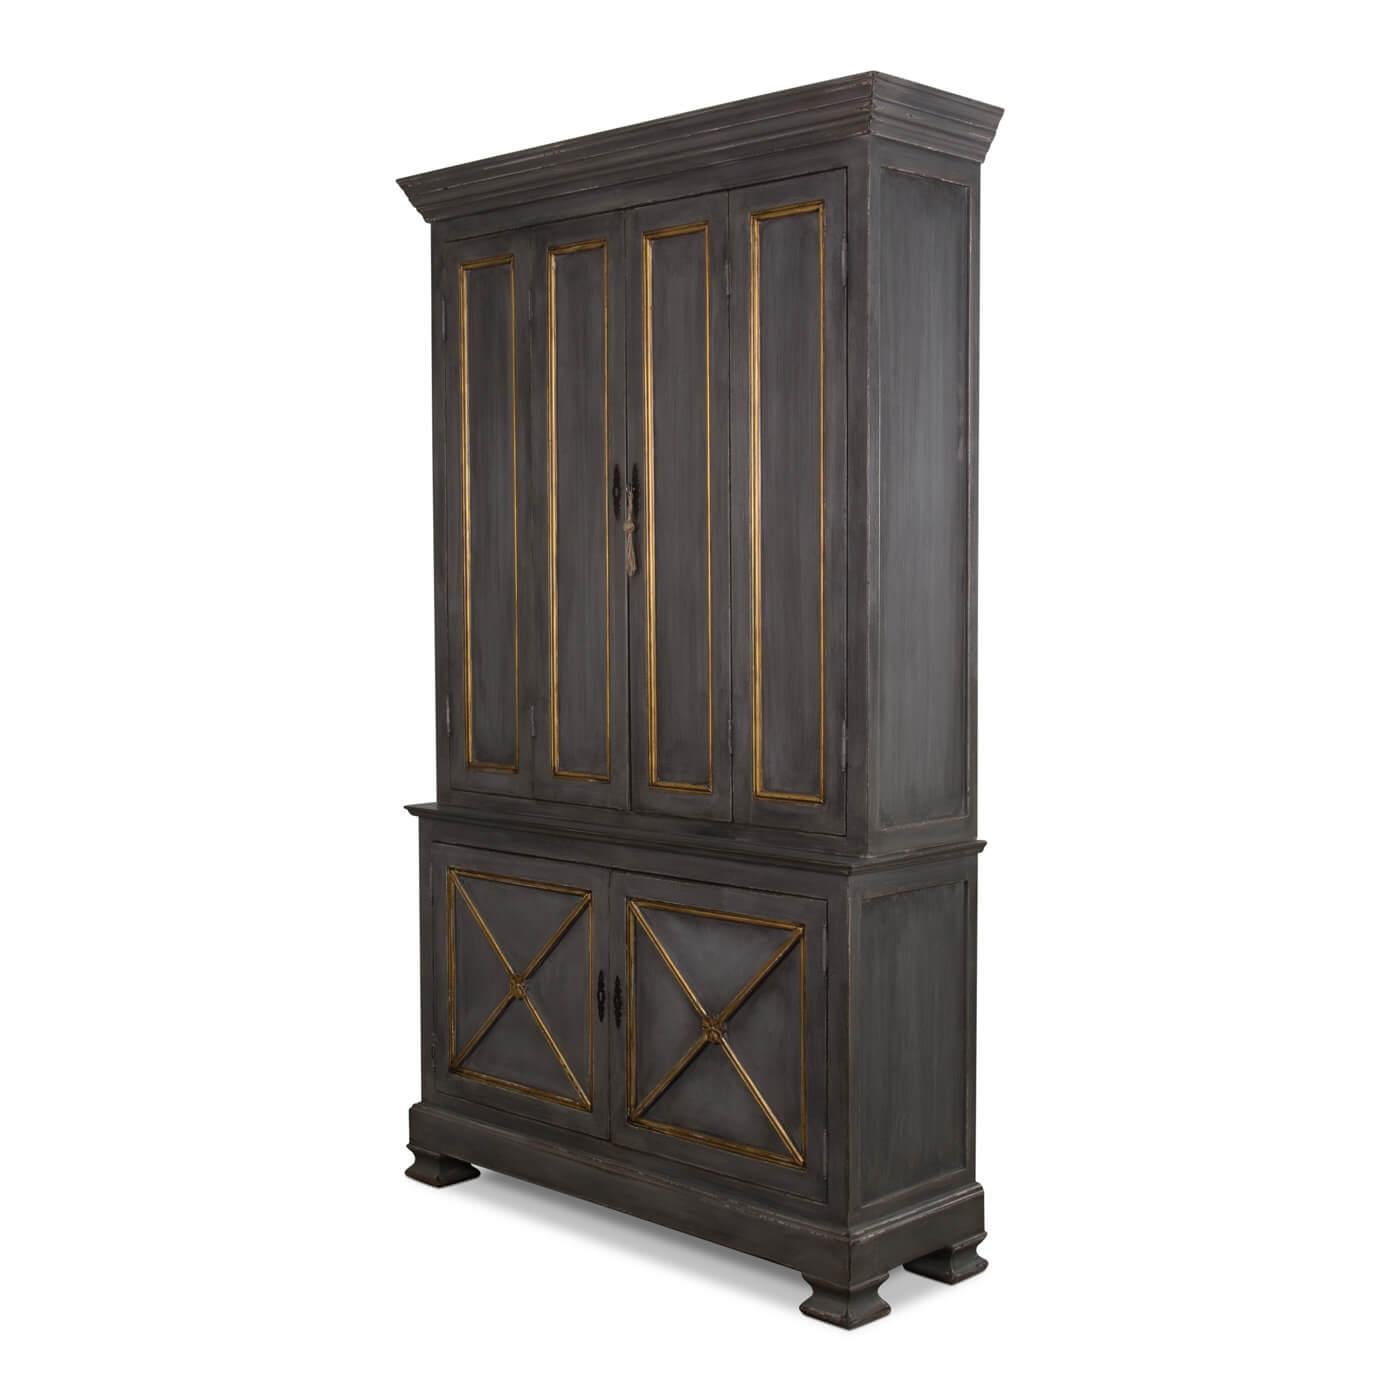 French-inspired Provincial painted tall bookcase or cabinet in dark grey with gold-painted accents. This beautiful cabinet is inspired by an 18th-century French antique. 

The upper cabinet has bi-fold doors and when open reveals a light